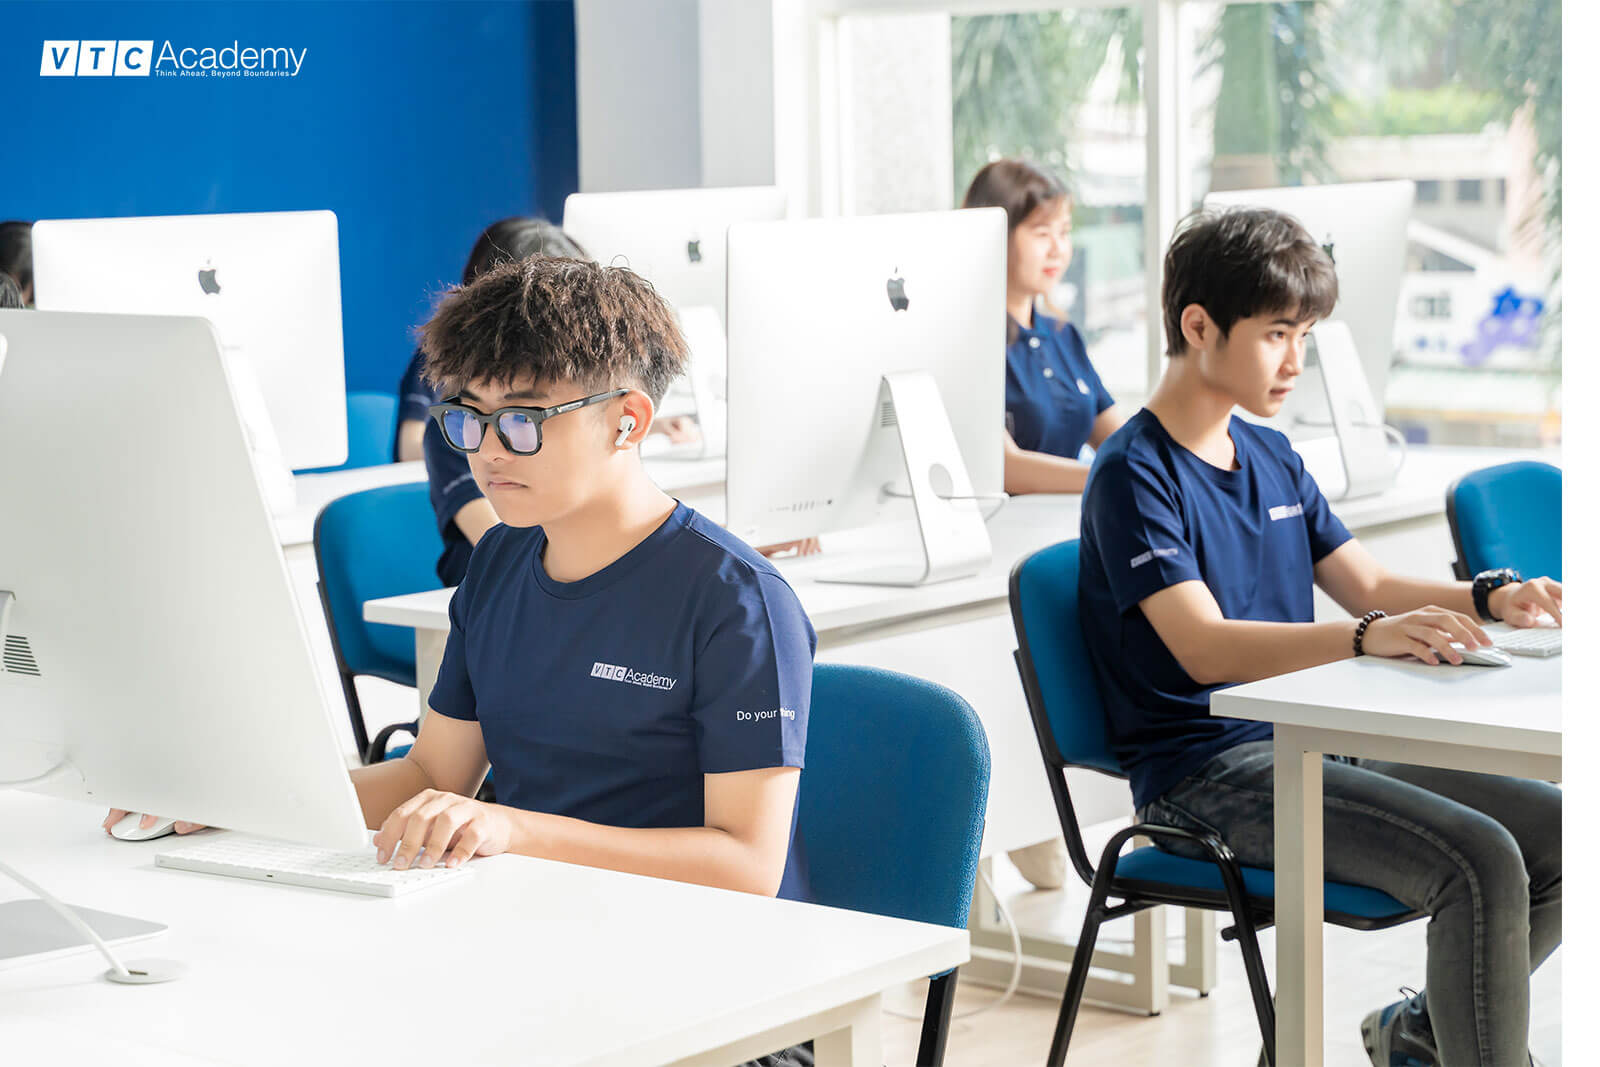 VTC Academy opens rolling admissions to the Programming and Design majors in October 2020